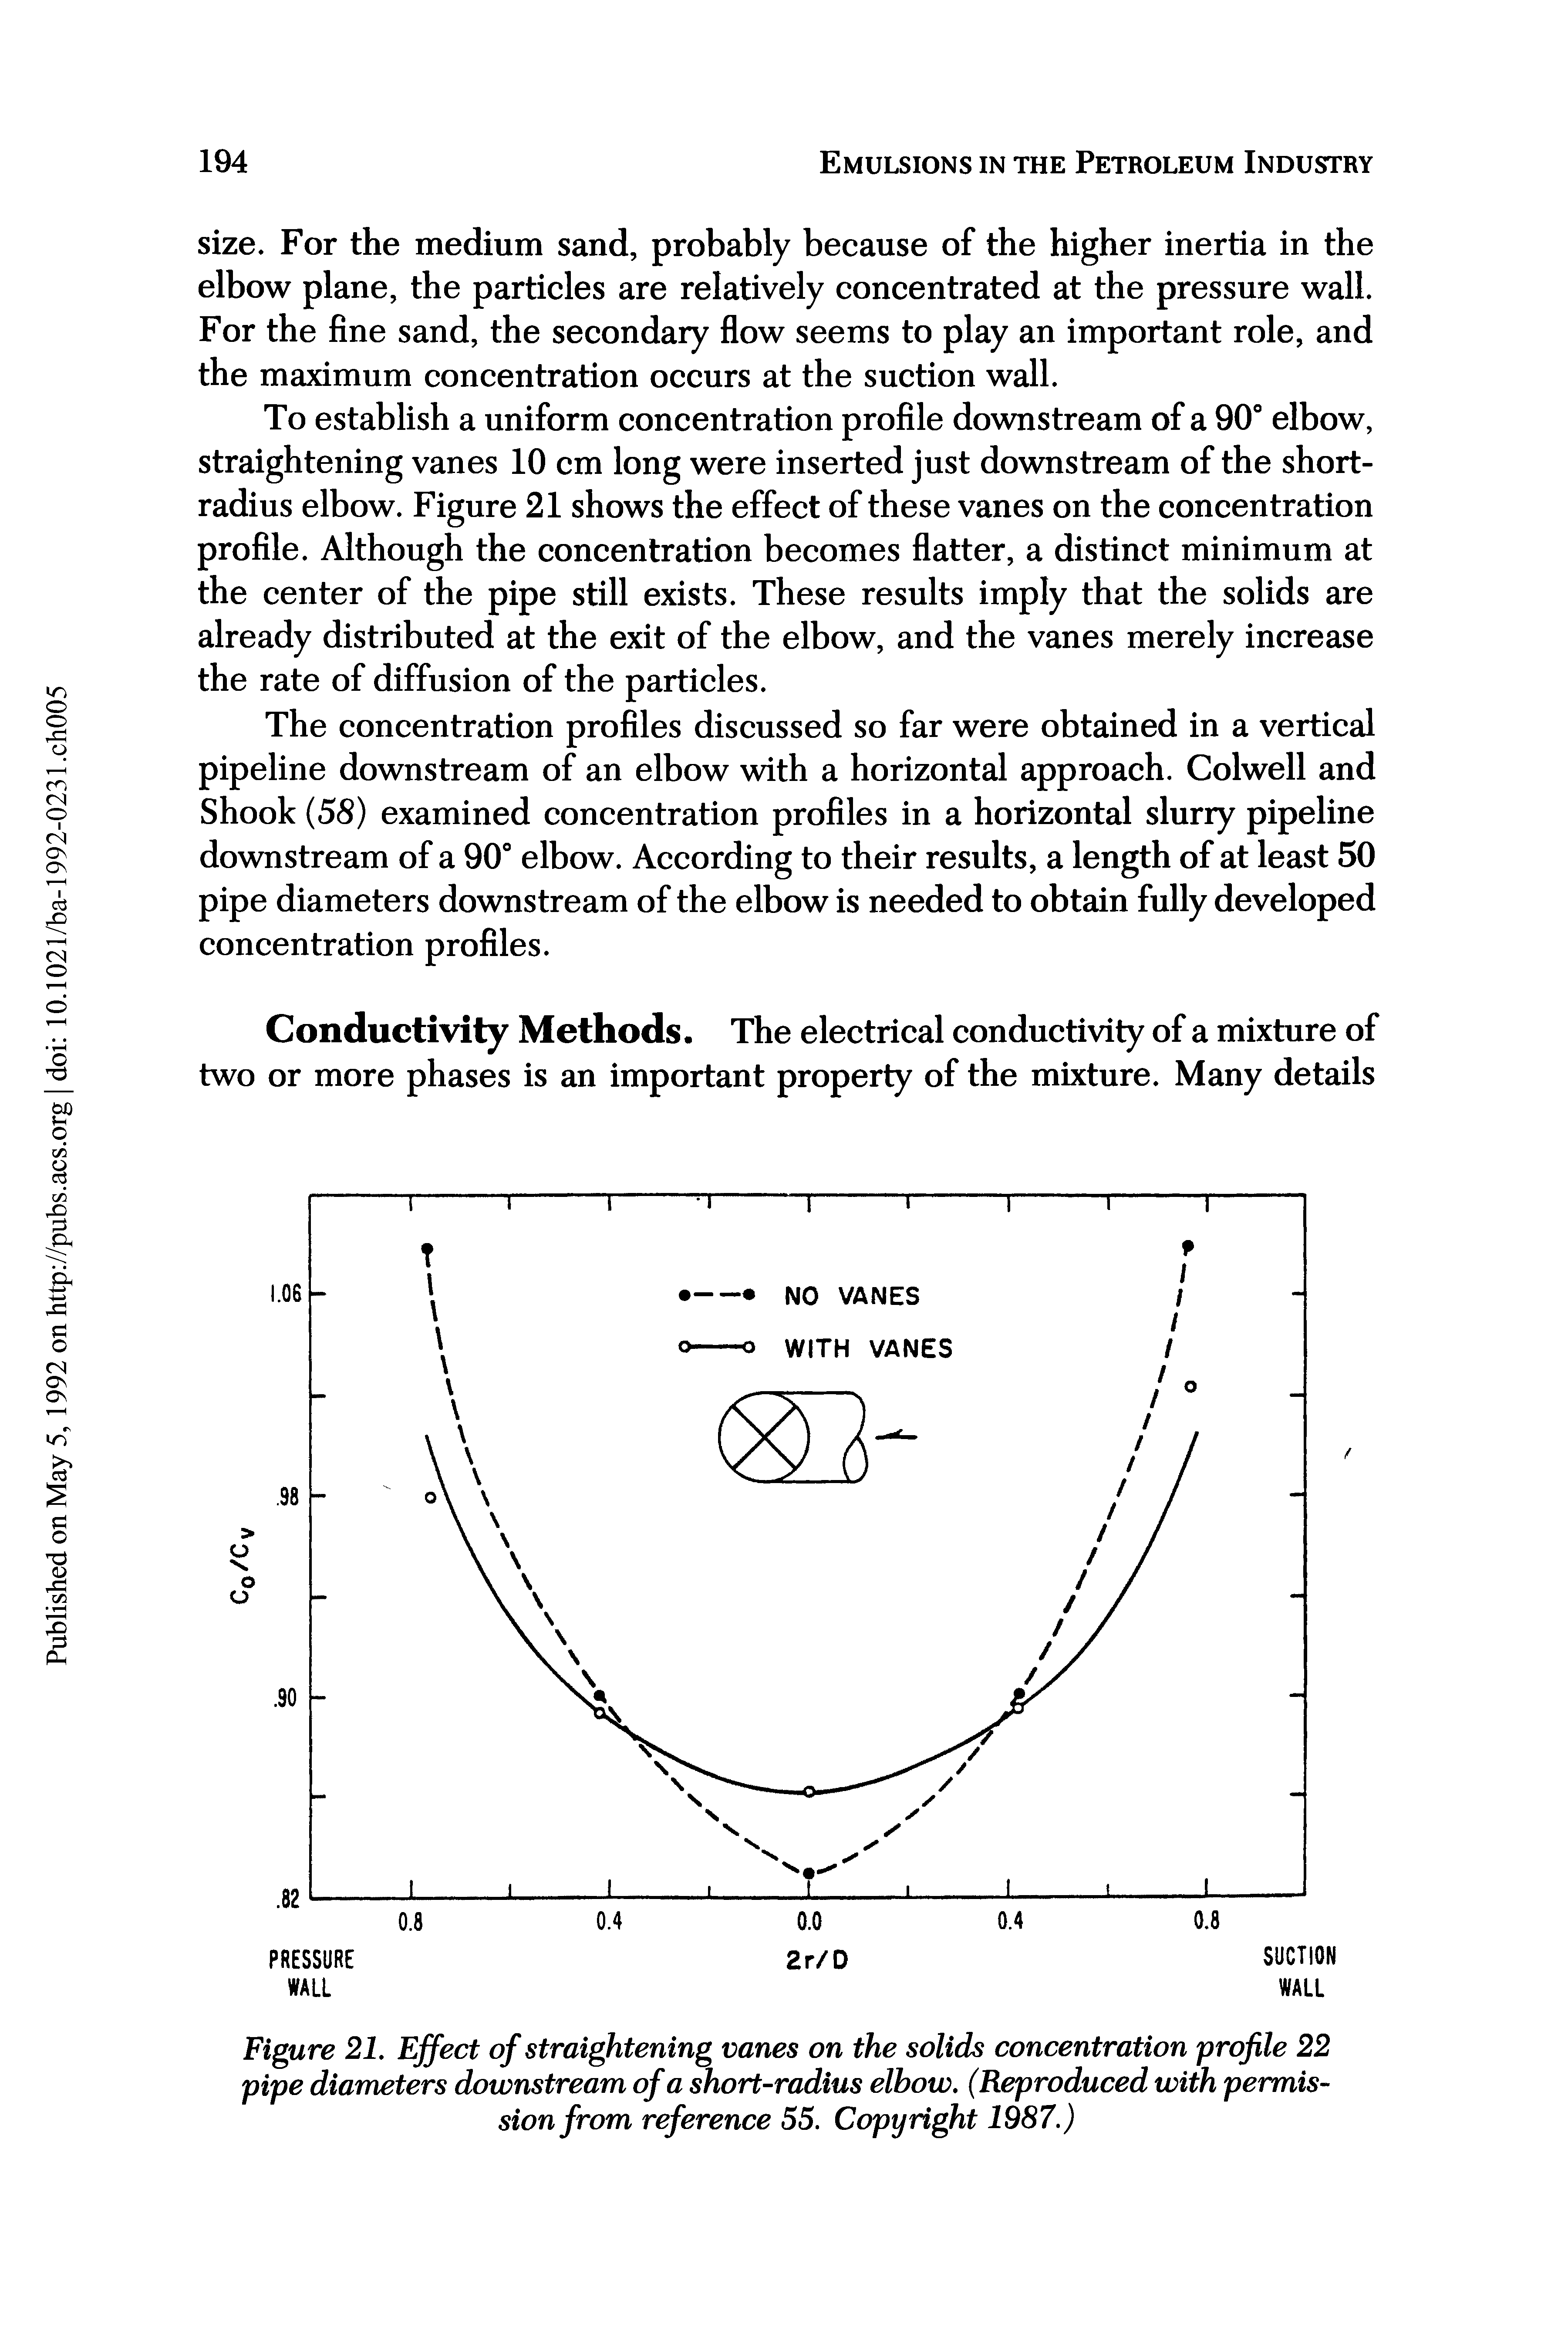 Figure 21. Effect of straightening vanes on the solids concentration profile 22 pipe diameters downstream of a short-radius elbow. (Reproduced with permission from reference 55. Copyright 1987.)...